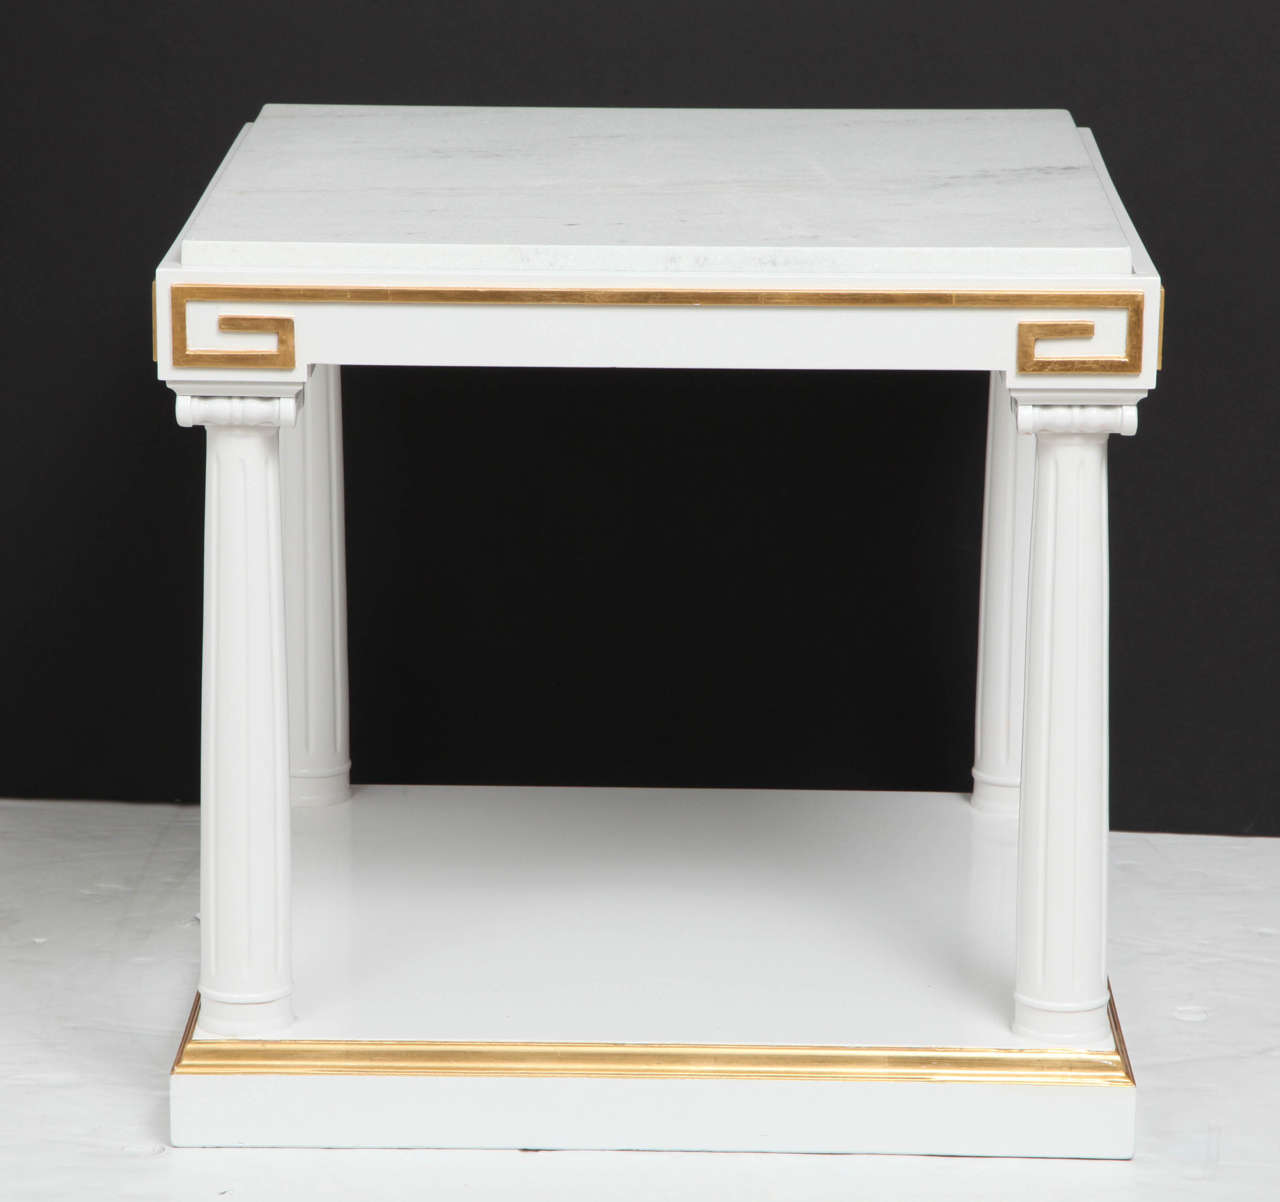 Pair of Neoclassical influenced side tables with fluted column supports and capitals in white lacquer. Tables also feature gold leaf Greek key details and white marble quartz inset tops.